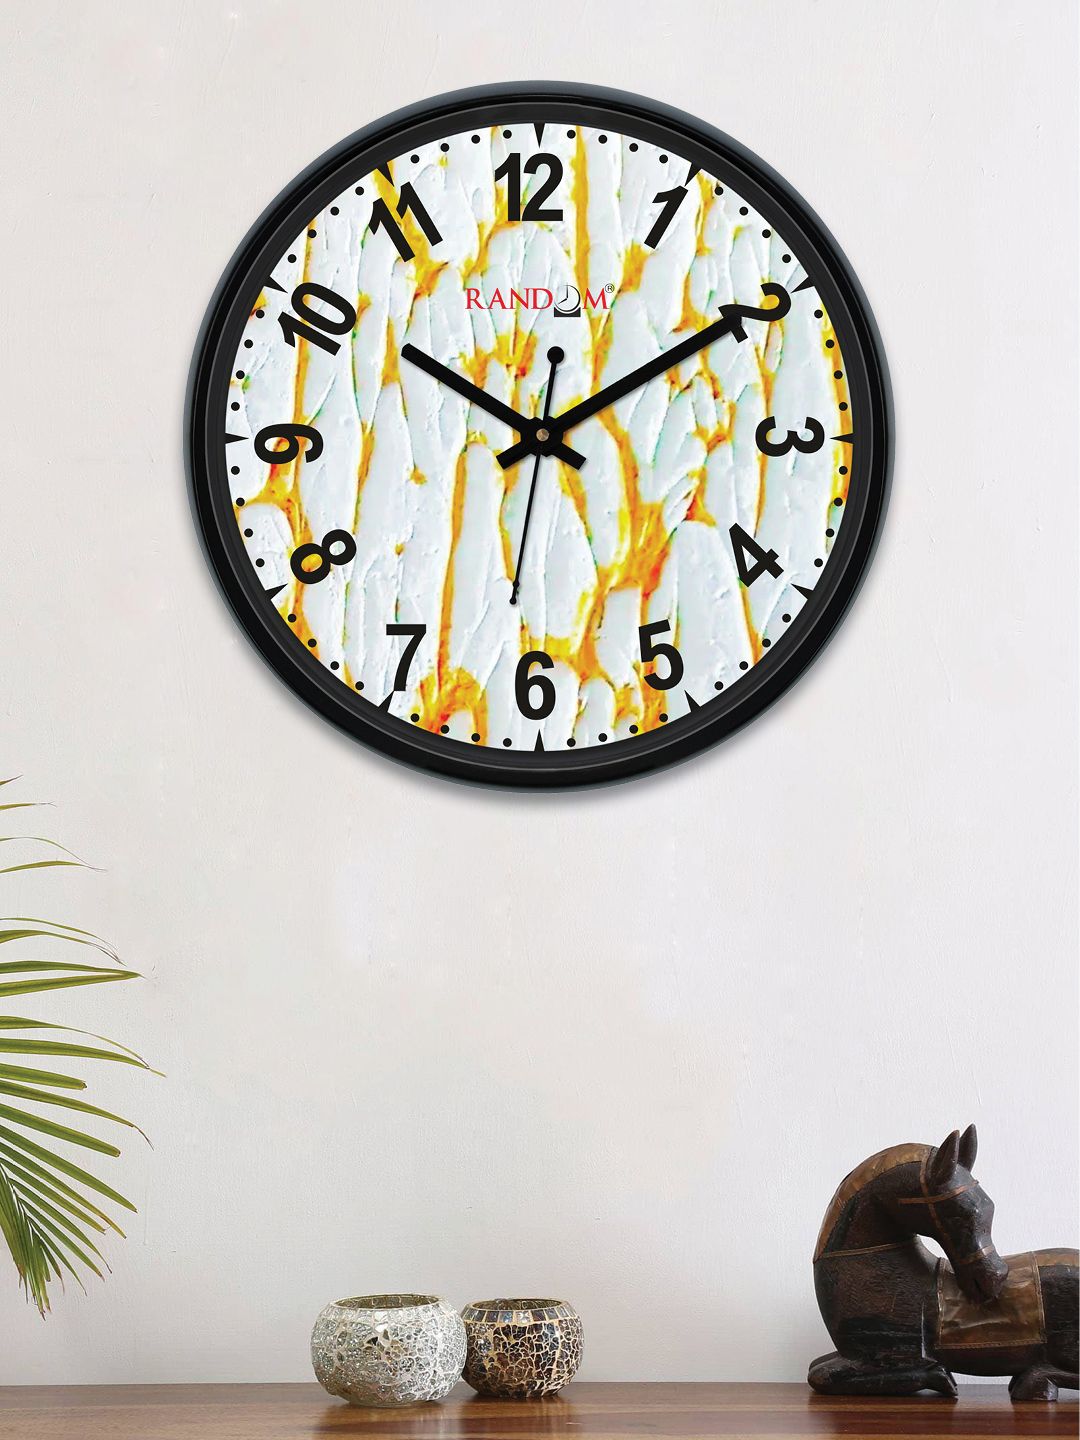 RANDOM Blue & Yellow Round Printed 30 cm Analogue Wall Clock Price in India